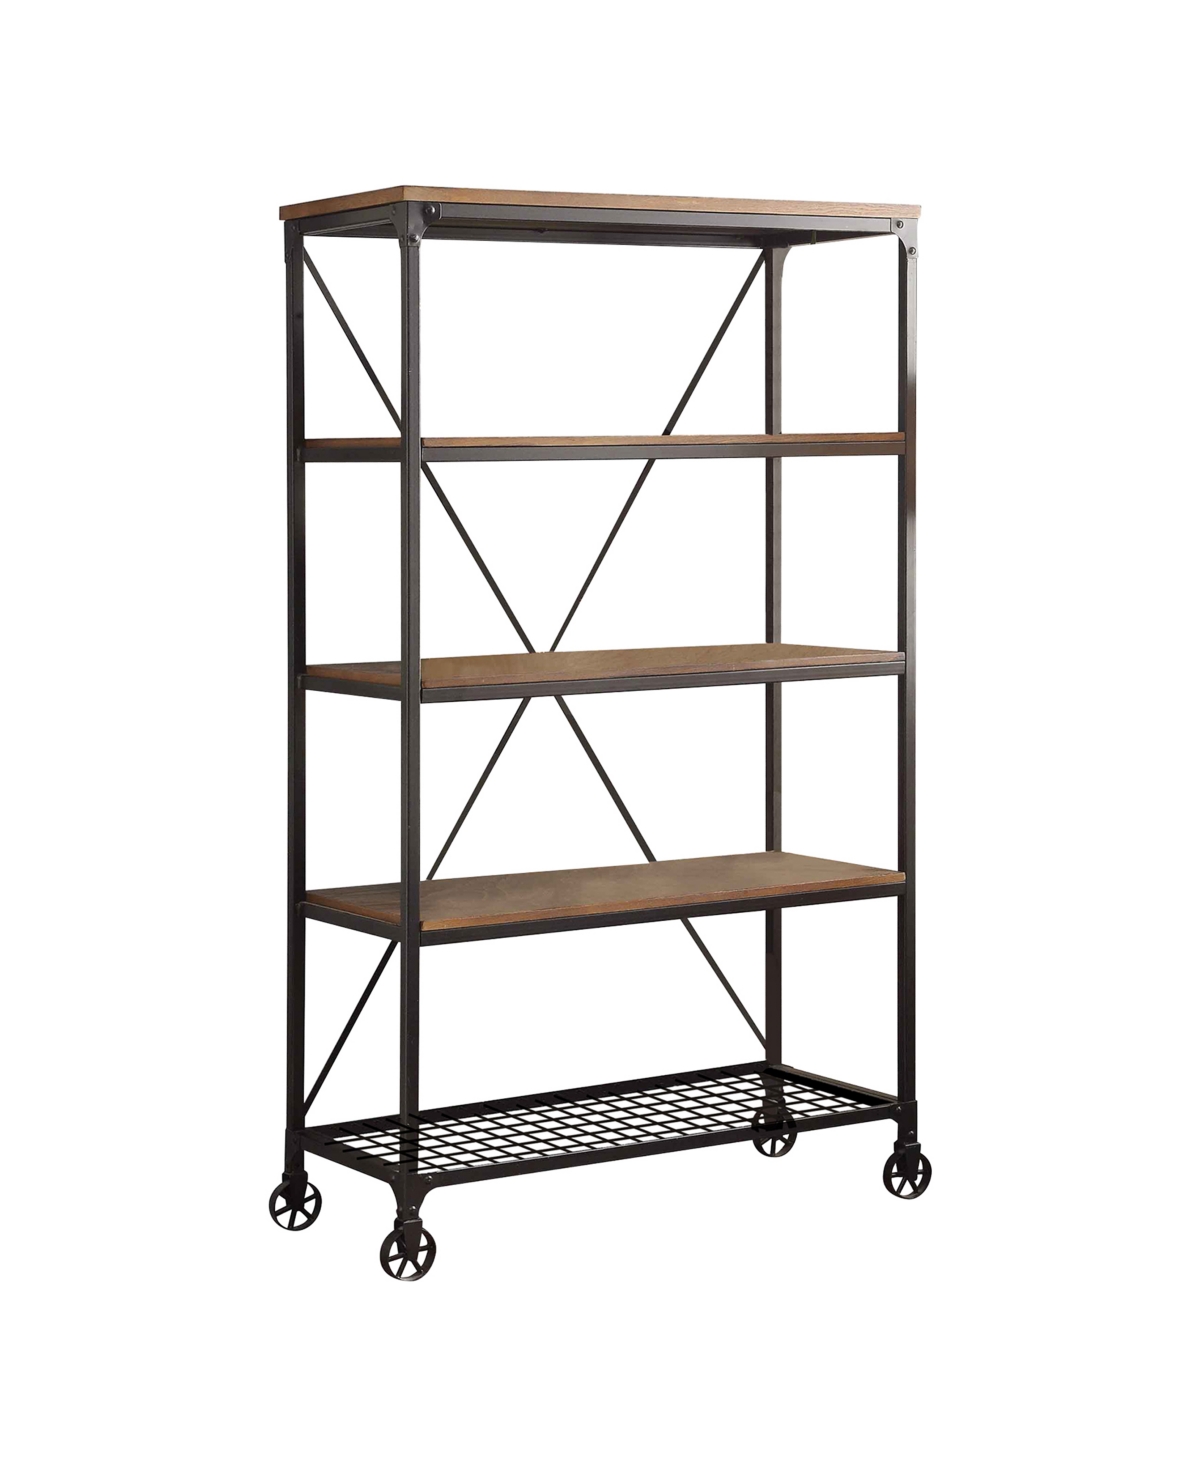 Furniture Thurmont 40"w Bookshelf In -tone Finish- Weathered Natural And Rust